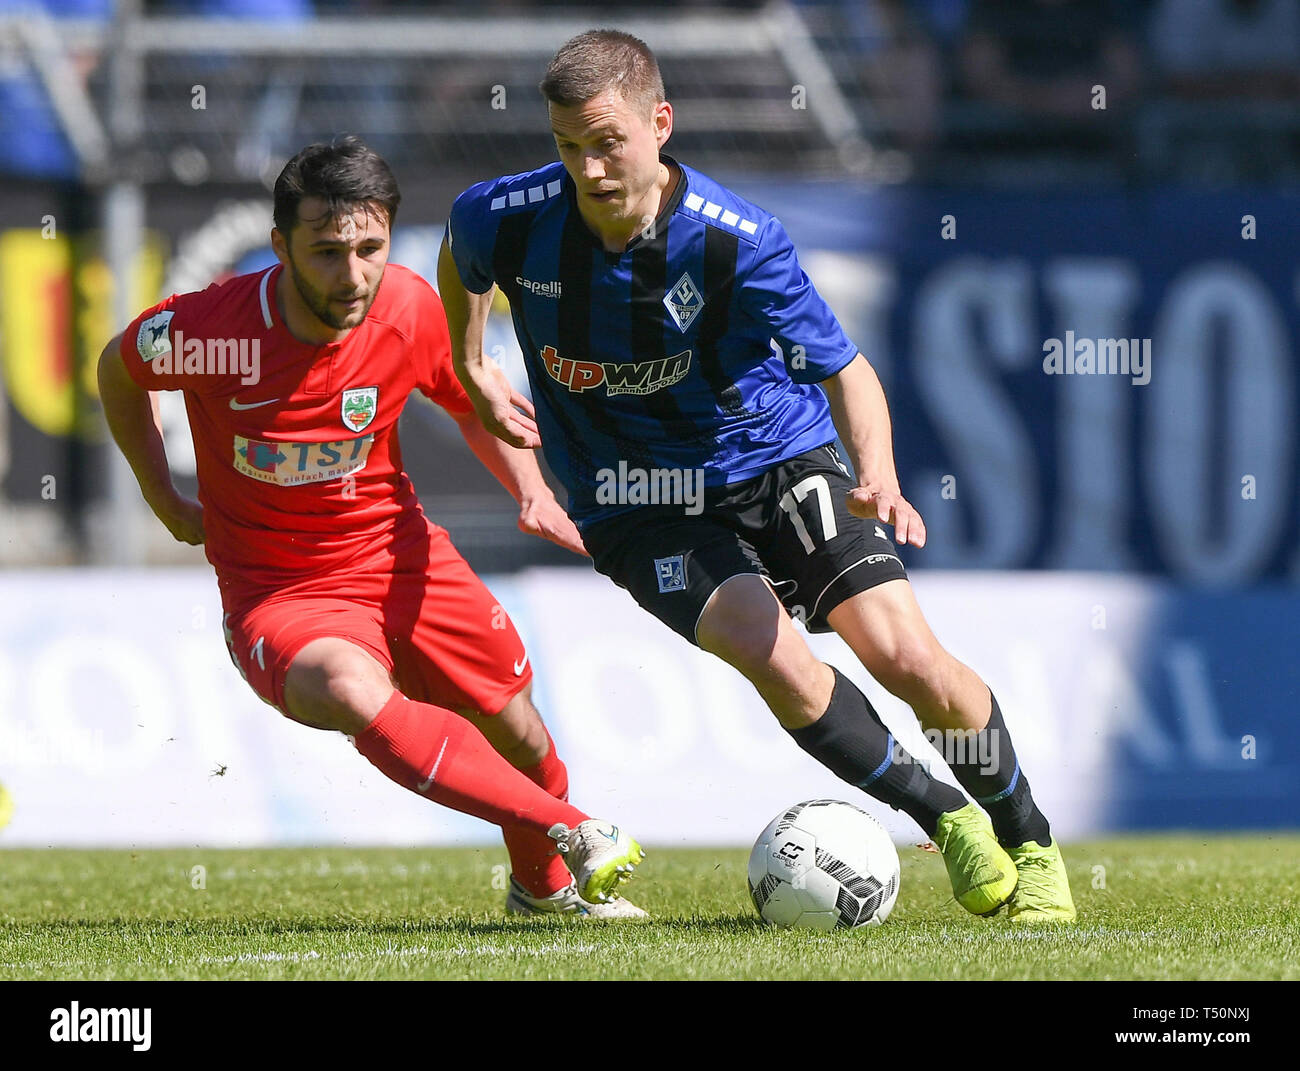 Regionalliga Südwest High Resolution Stock Photography and Images - Alamy